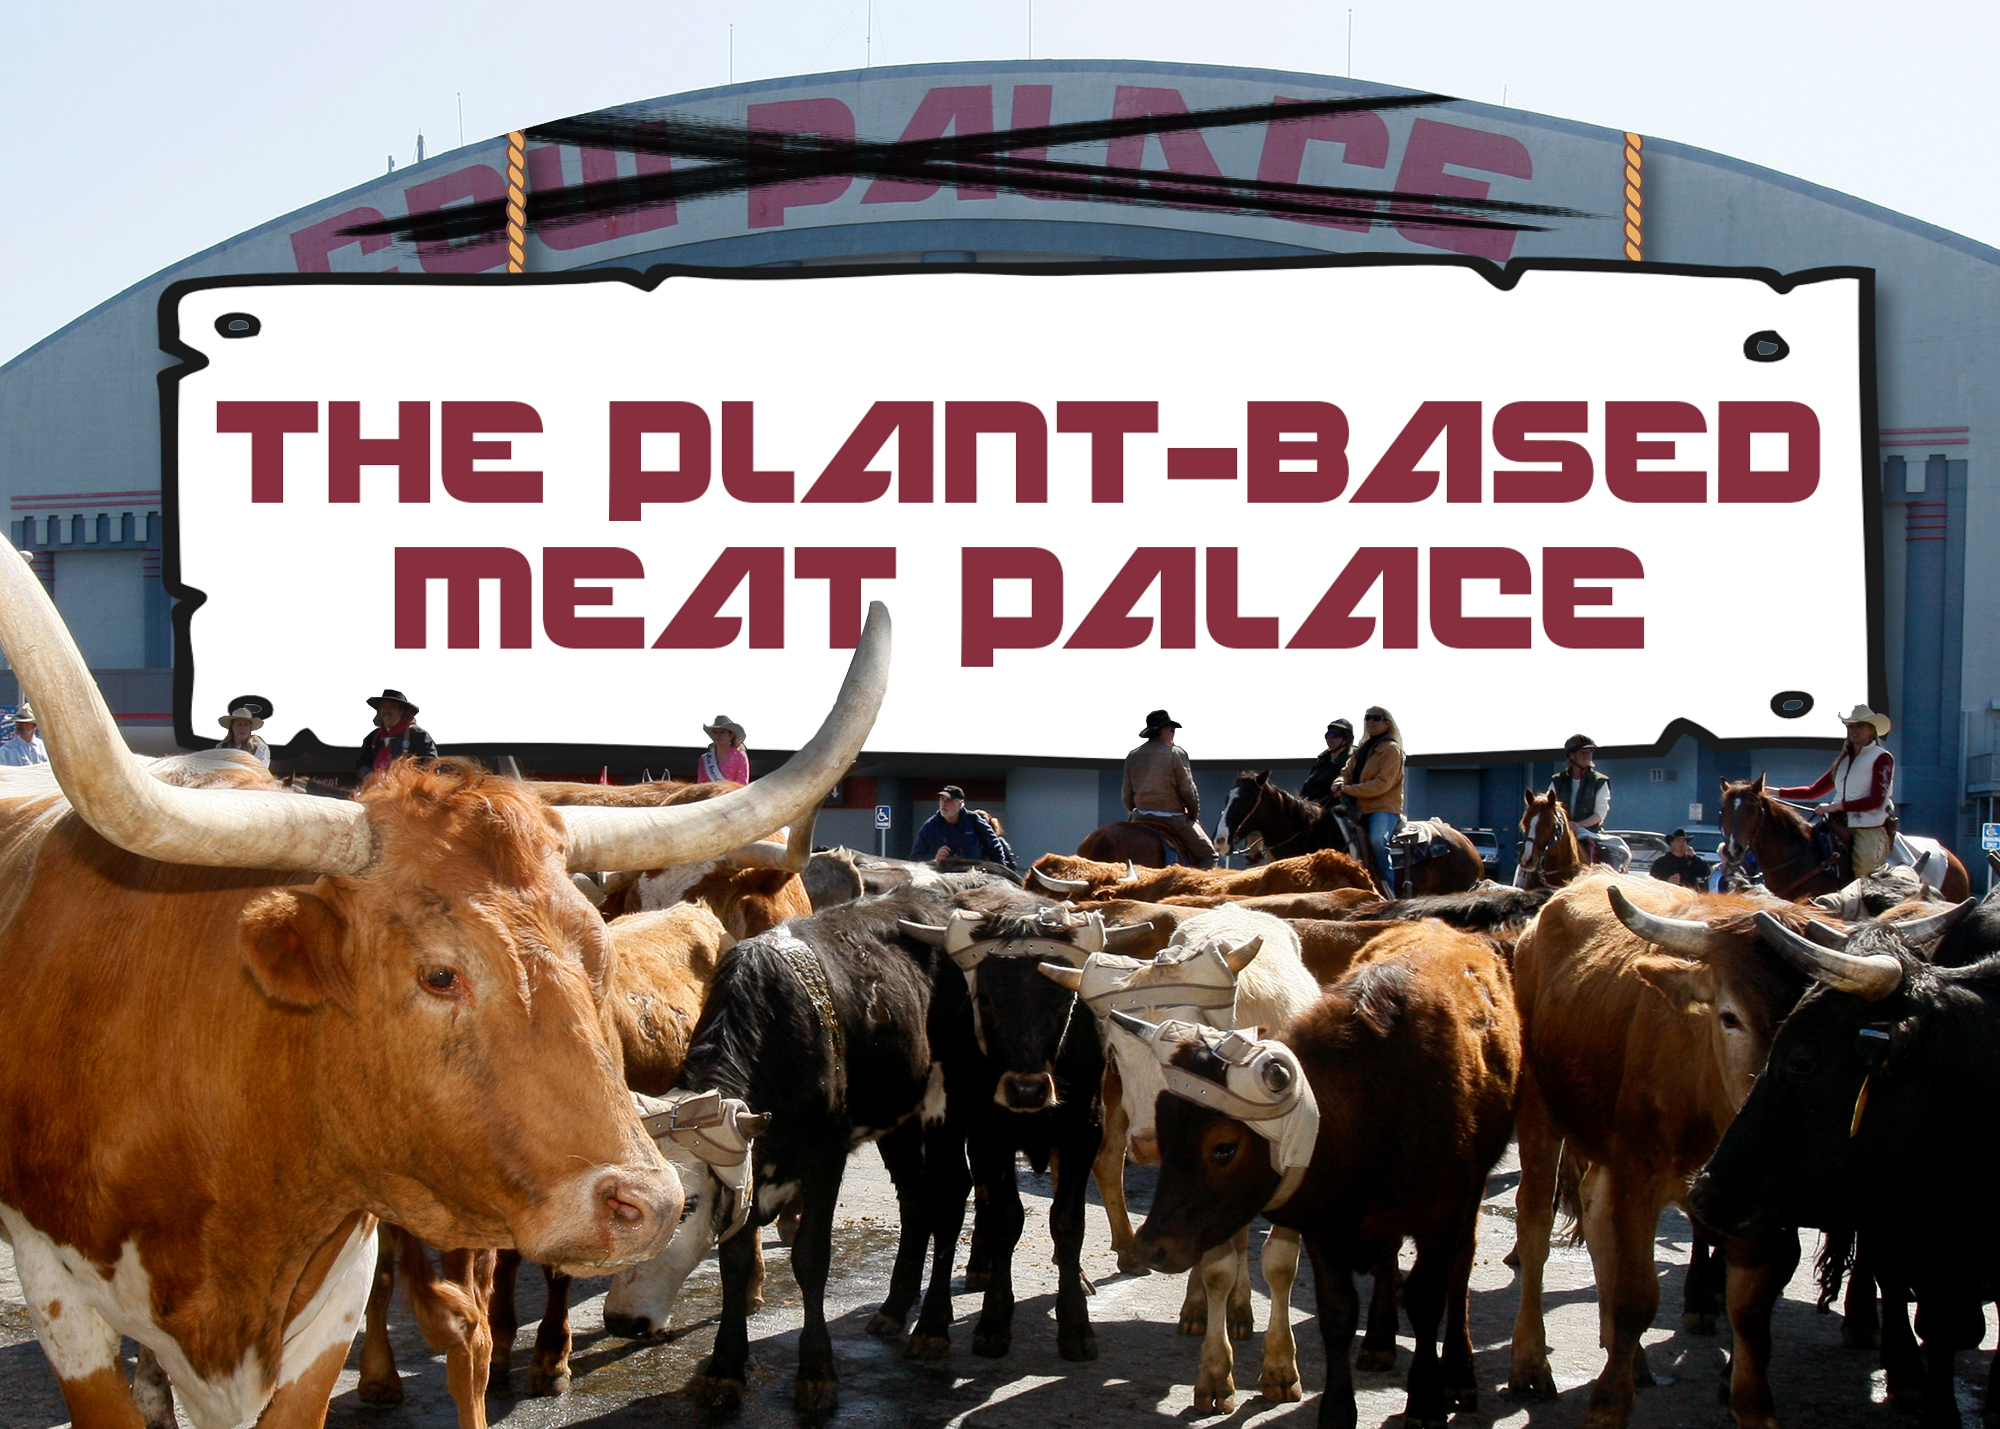 Cattle in front of a arena with a sign welcoming them.